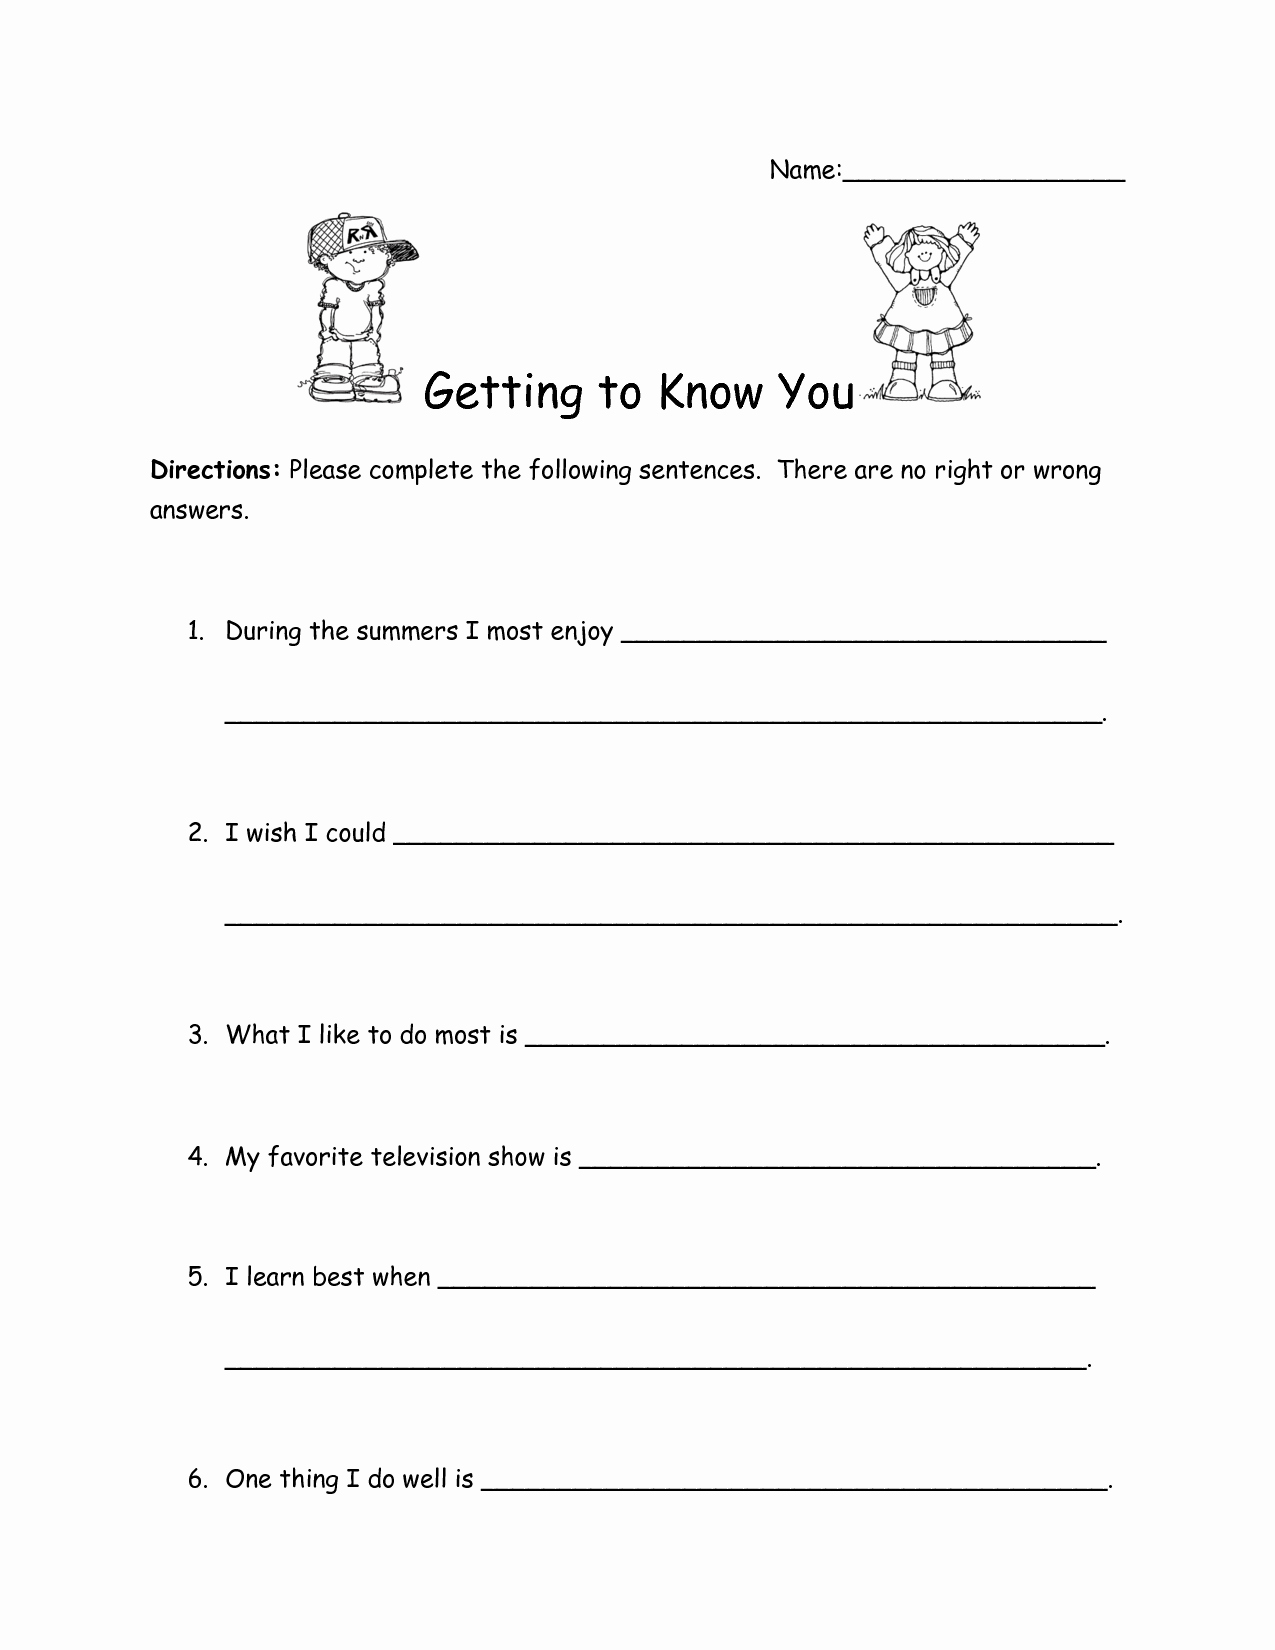 Getting to Know You Worksheet Elegant 14 Best Of Worksheets About You English Language